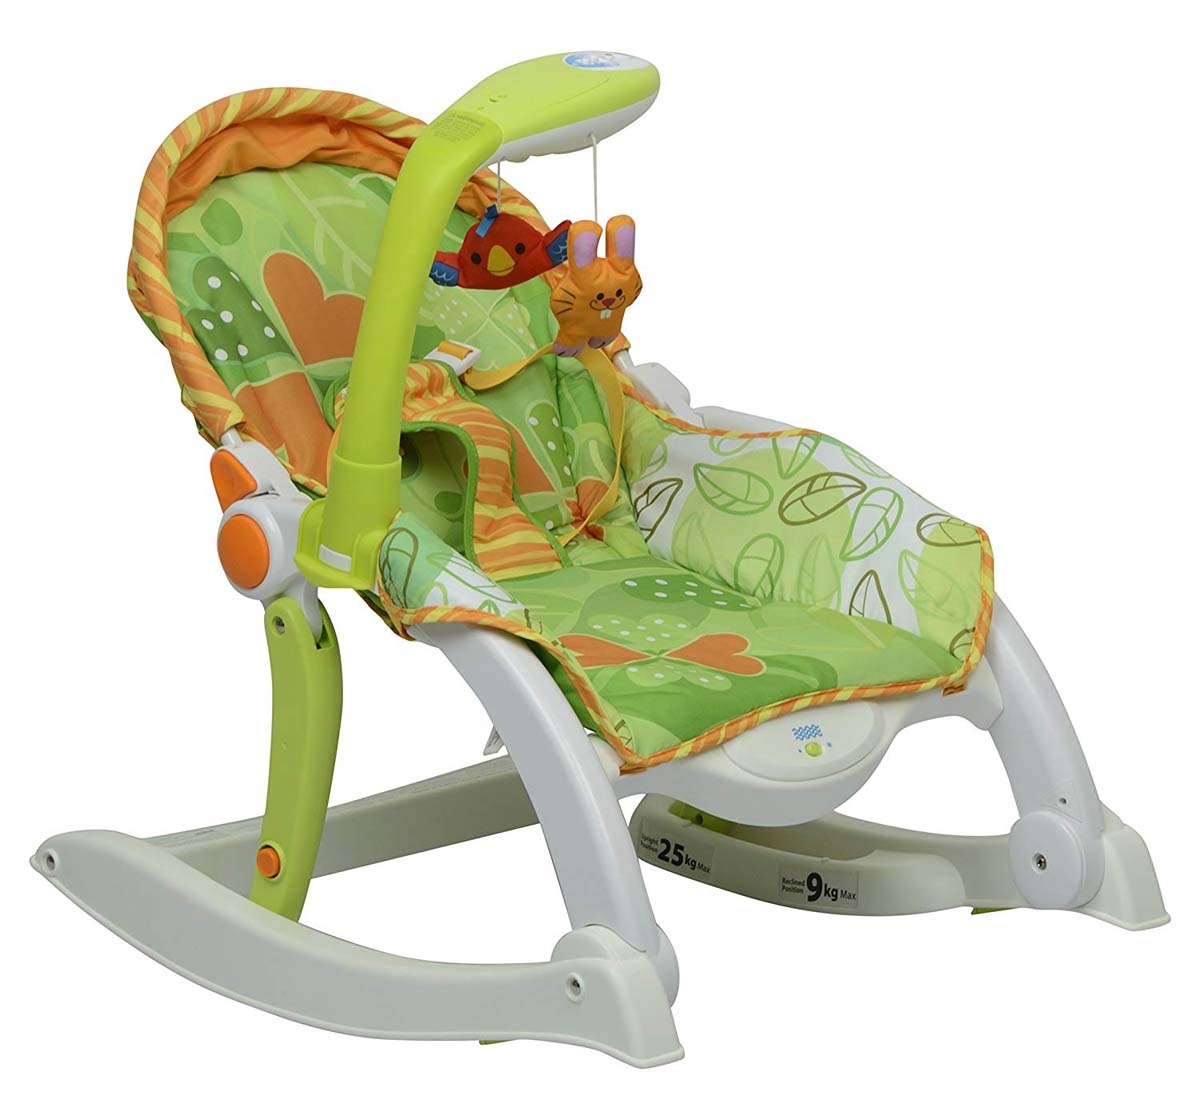 WinFun | Winfun Grow with me Rocking Chair (Multicolour) Baby Gear for Kids age 24M+ 